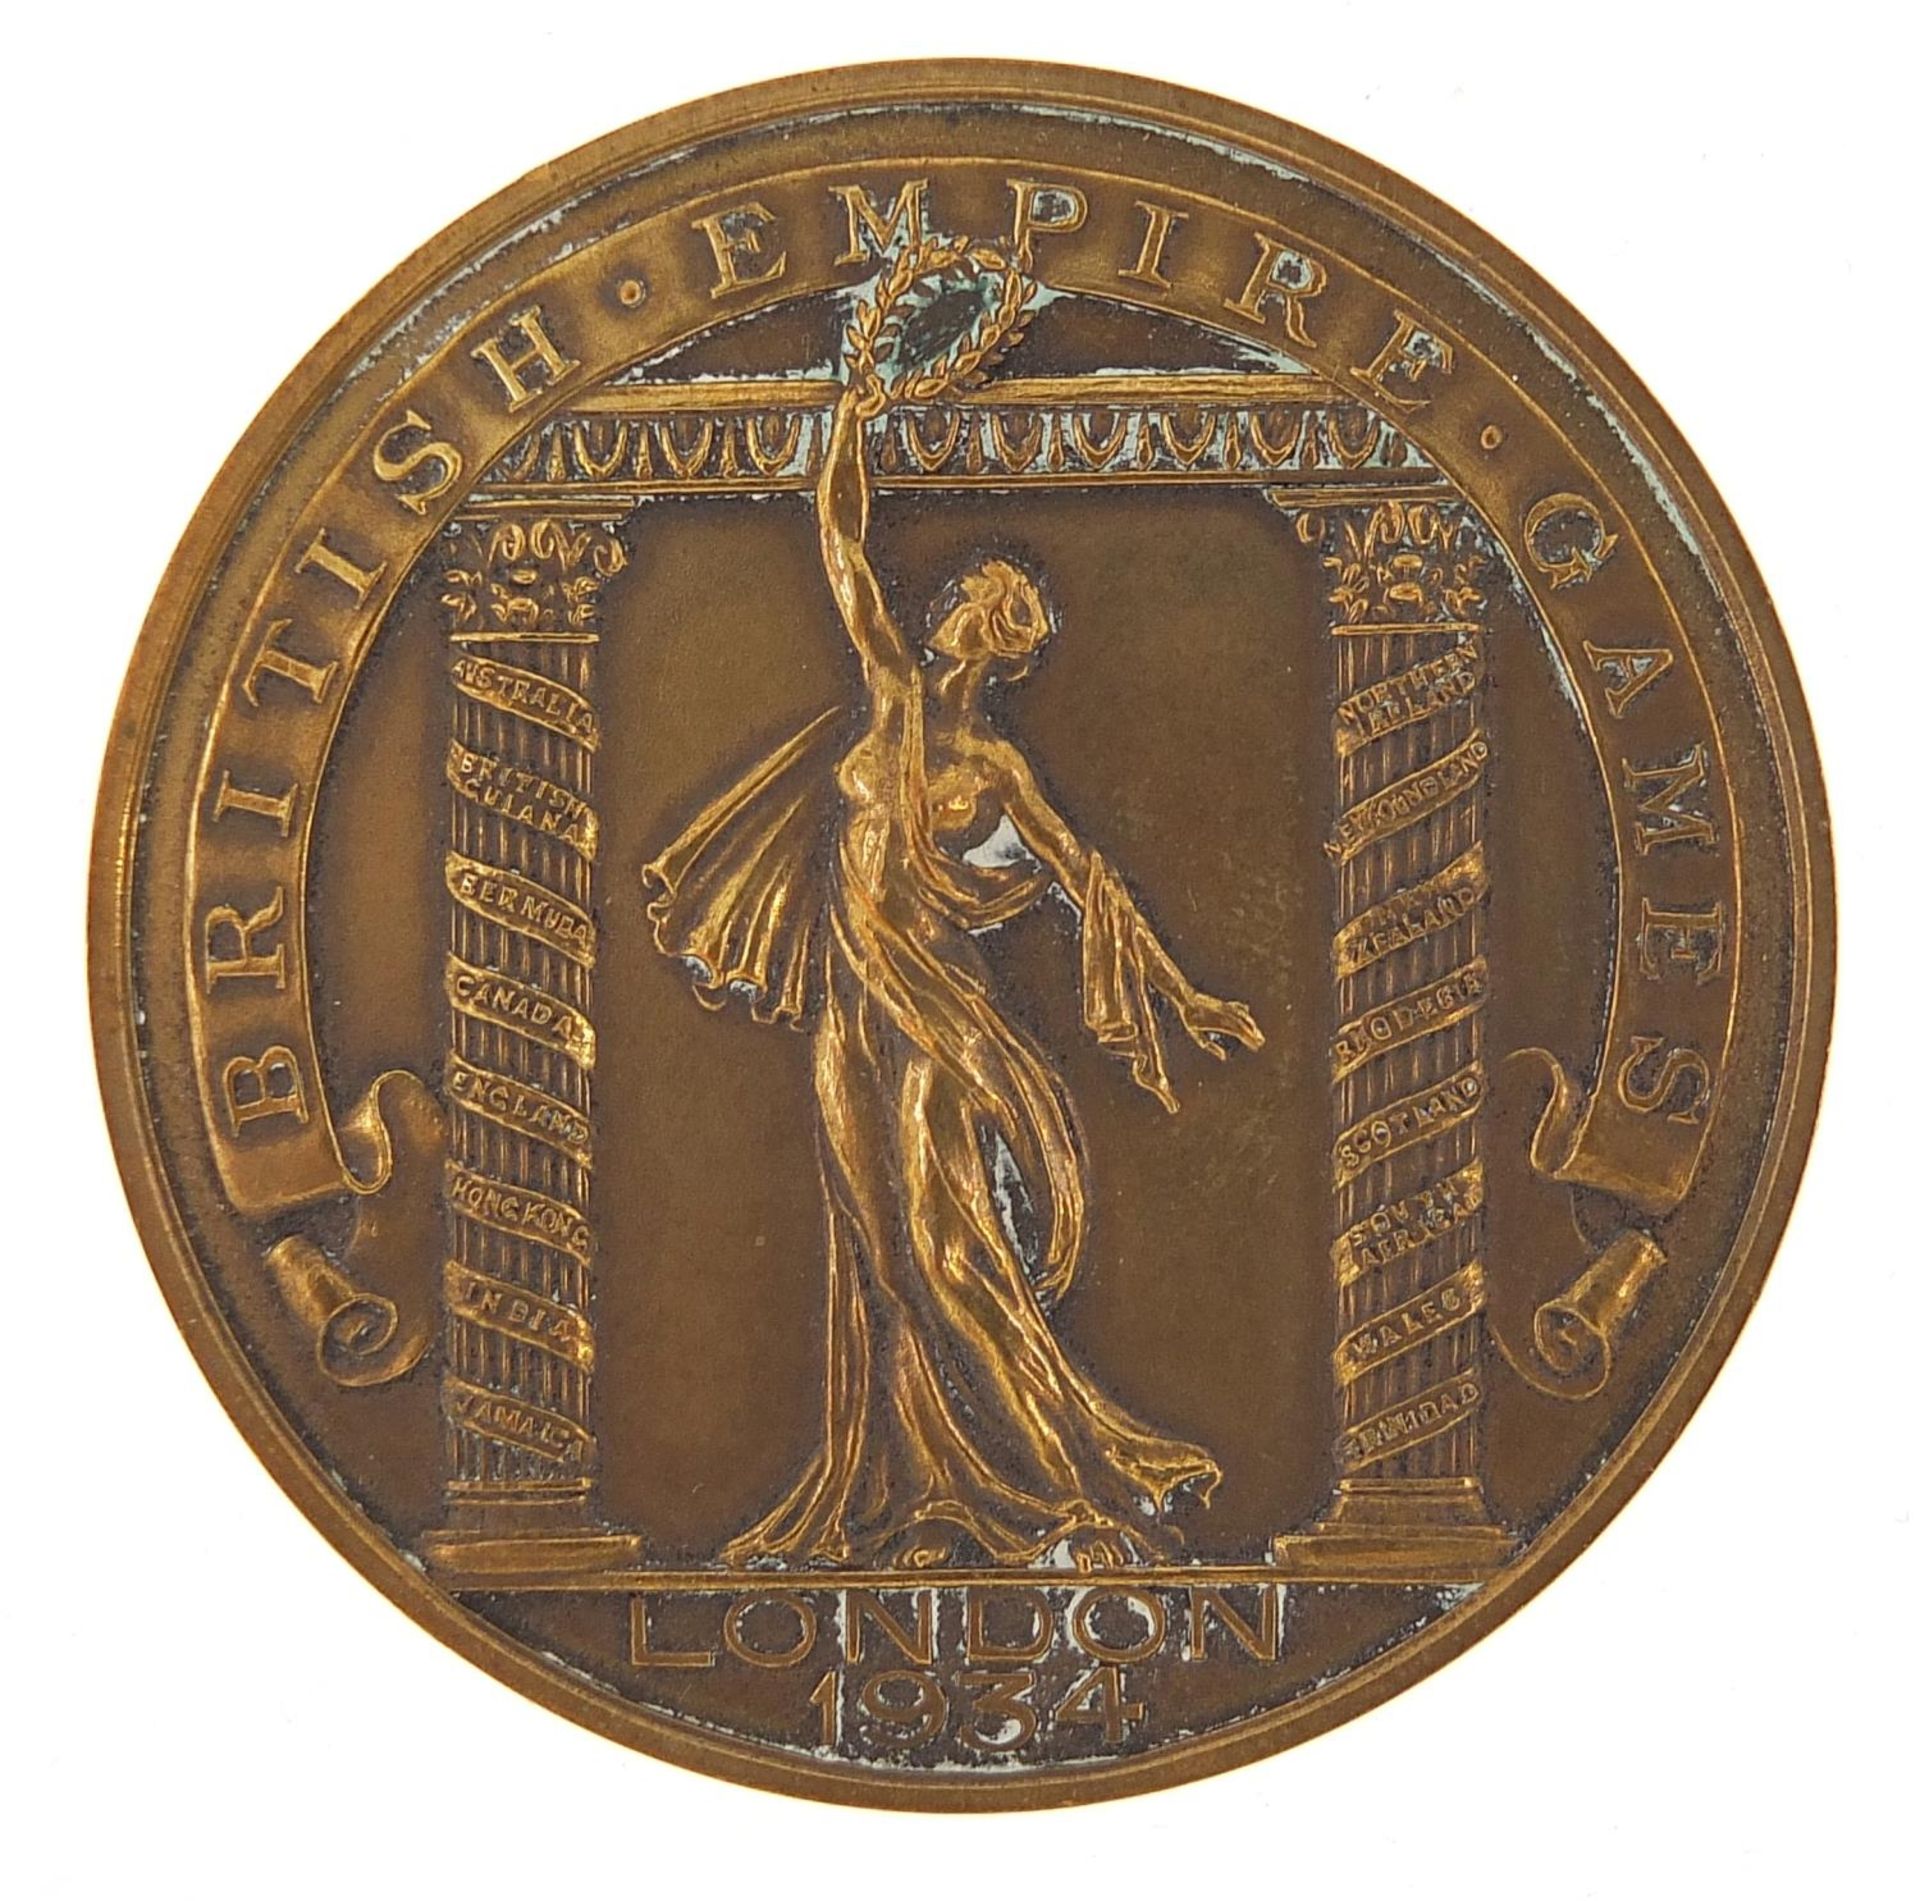 London 1934 British Empire Games bronze participant's medallion, previously owned by George Nicol,